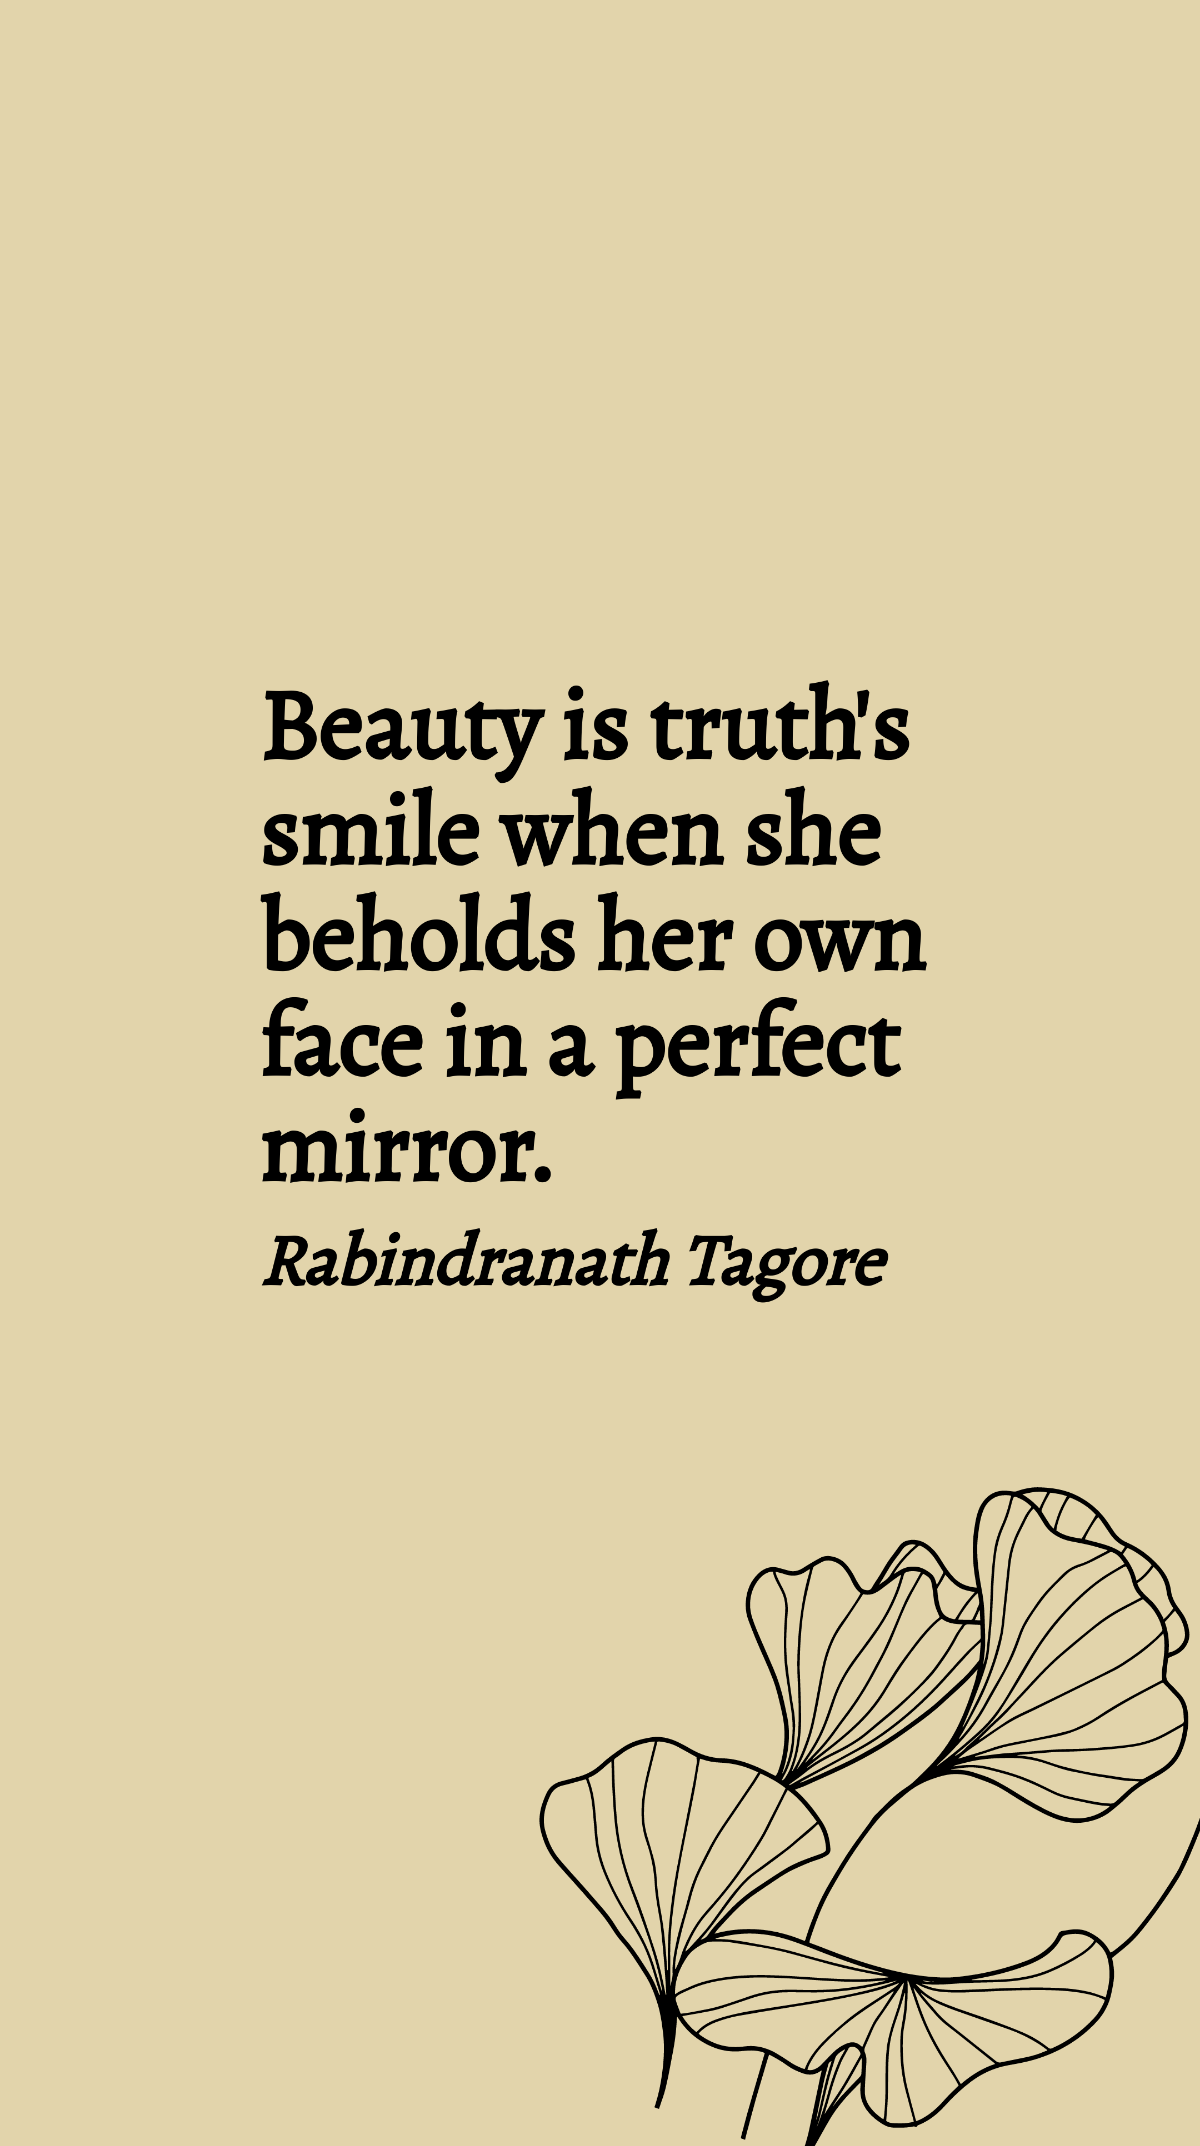 Free Rabindranath Tagore - Beauty is truth's smile when she beholds her own face in a perfect mirror. Template